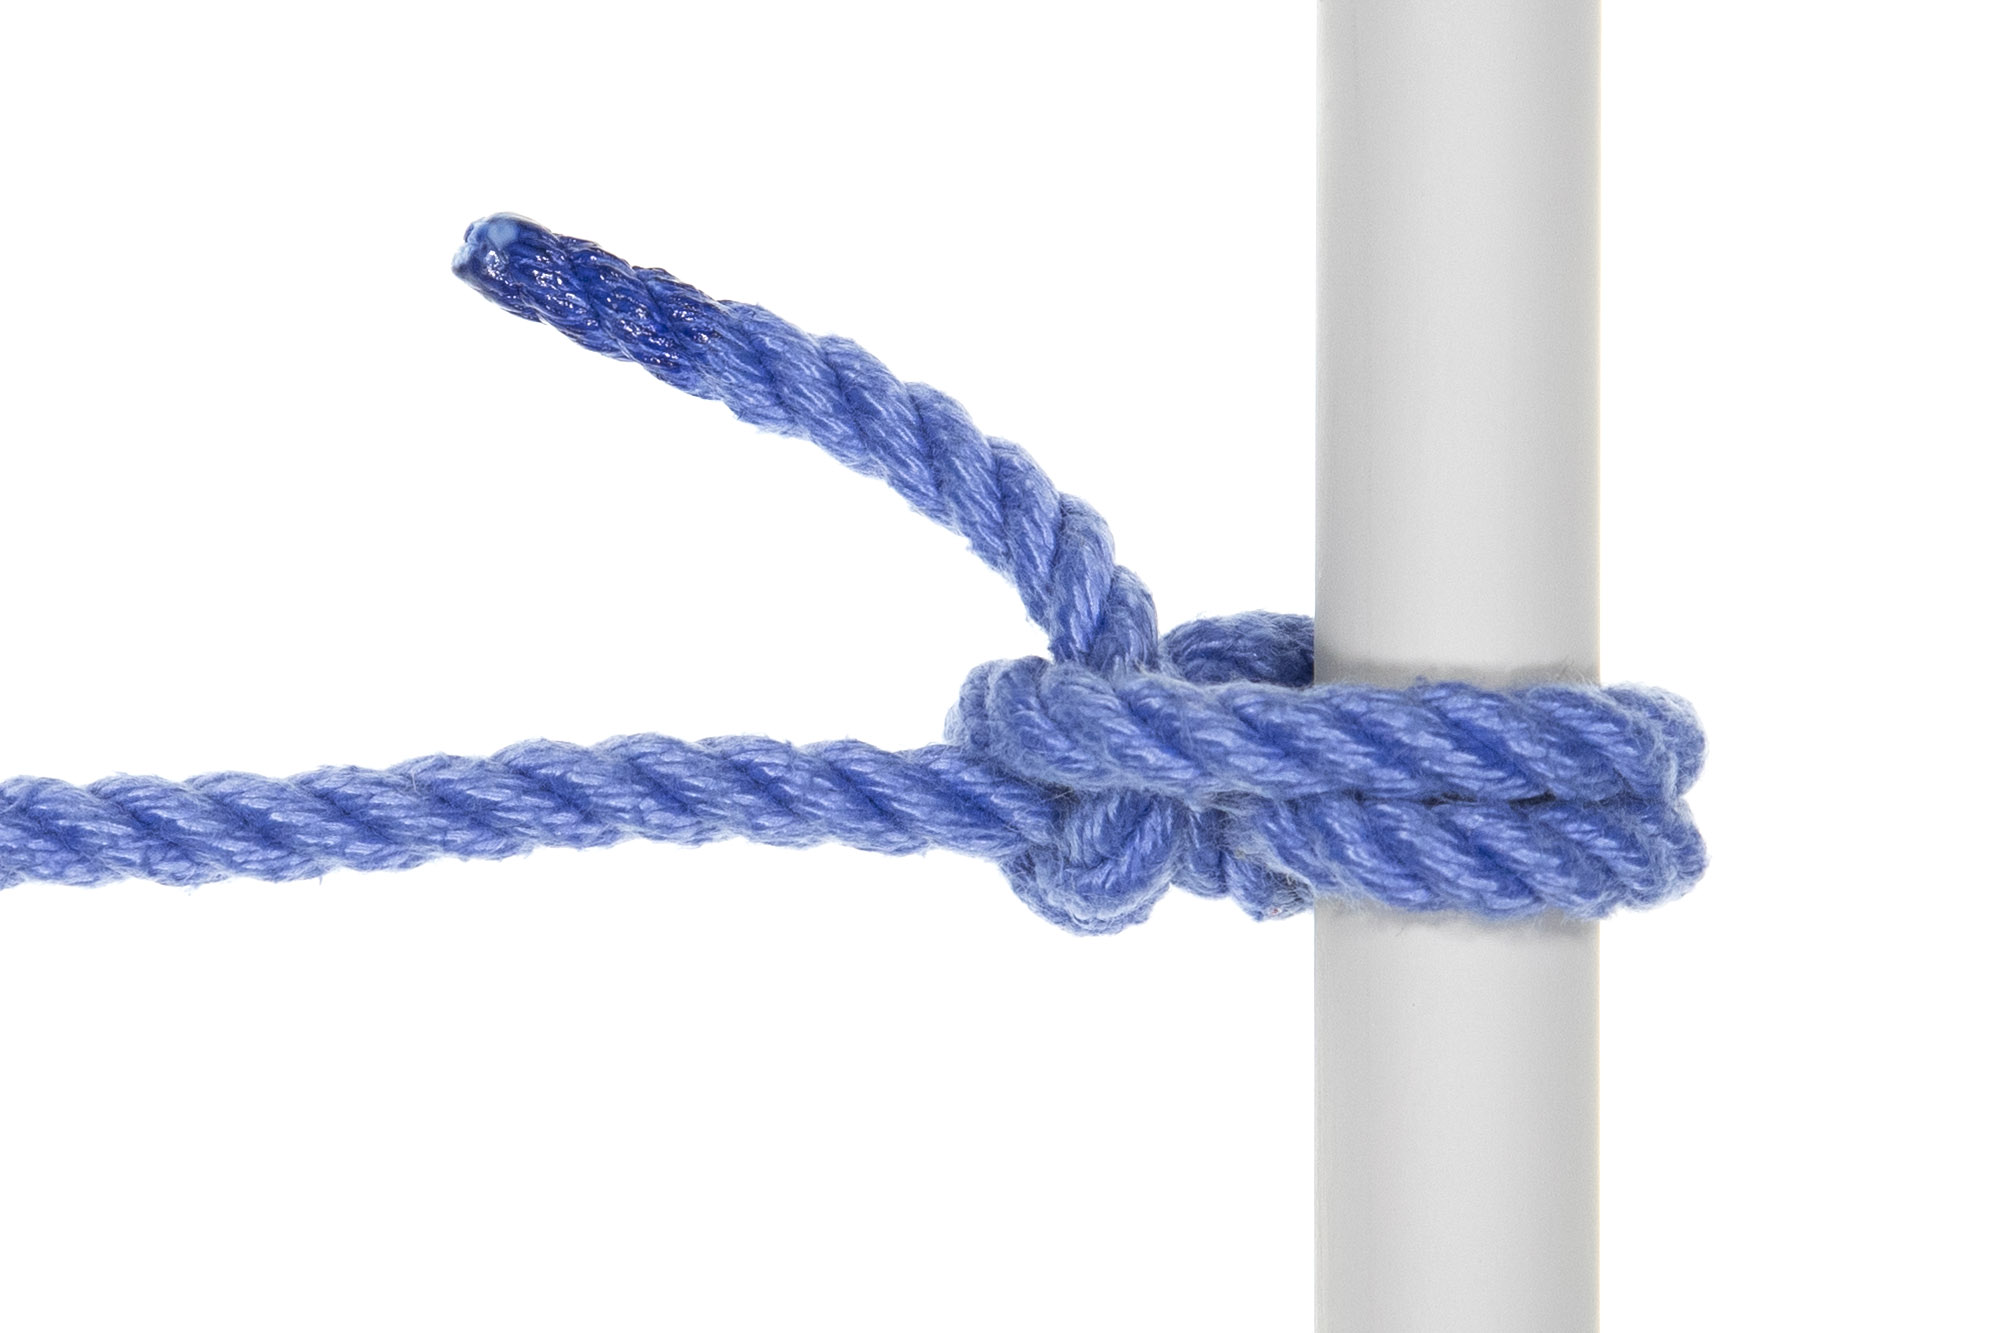 A one inch gray pole crosses the frame vertically. A blue rope enters from the left and is tied to the pole with a Munter hitch. There are two wraps around the pole and the knot is finished with a half hitch.